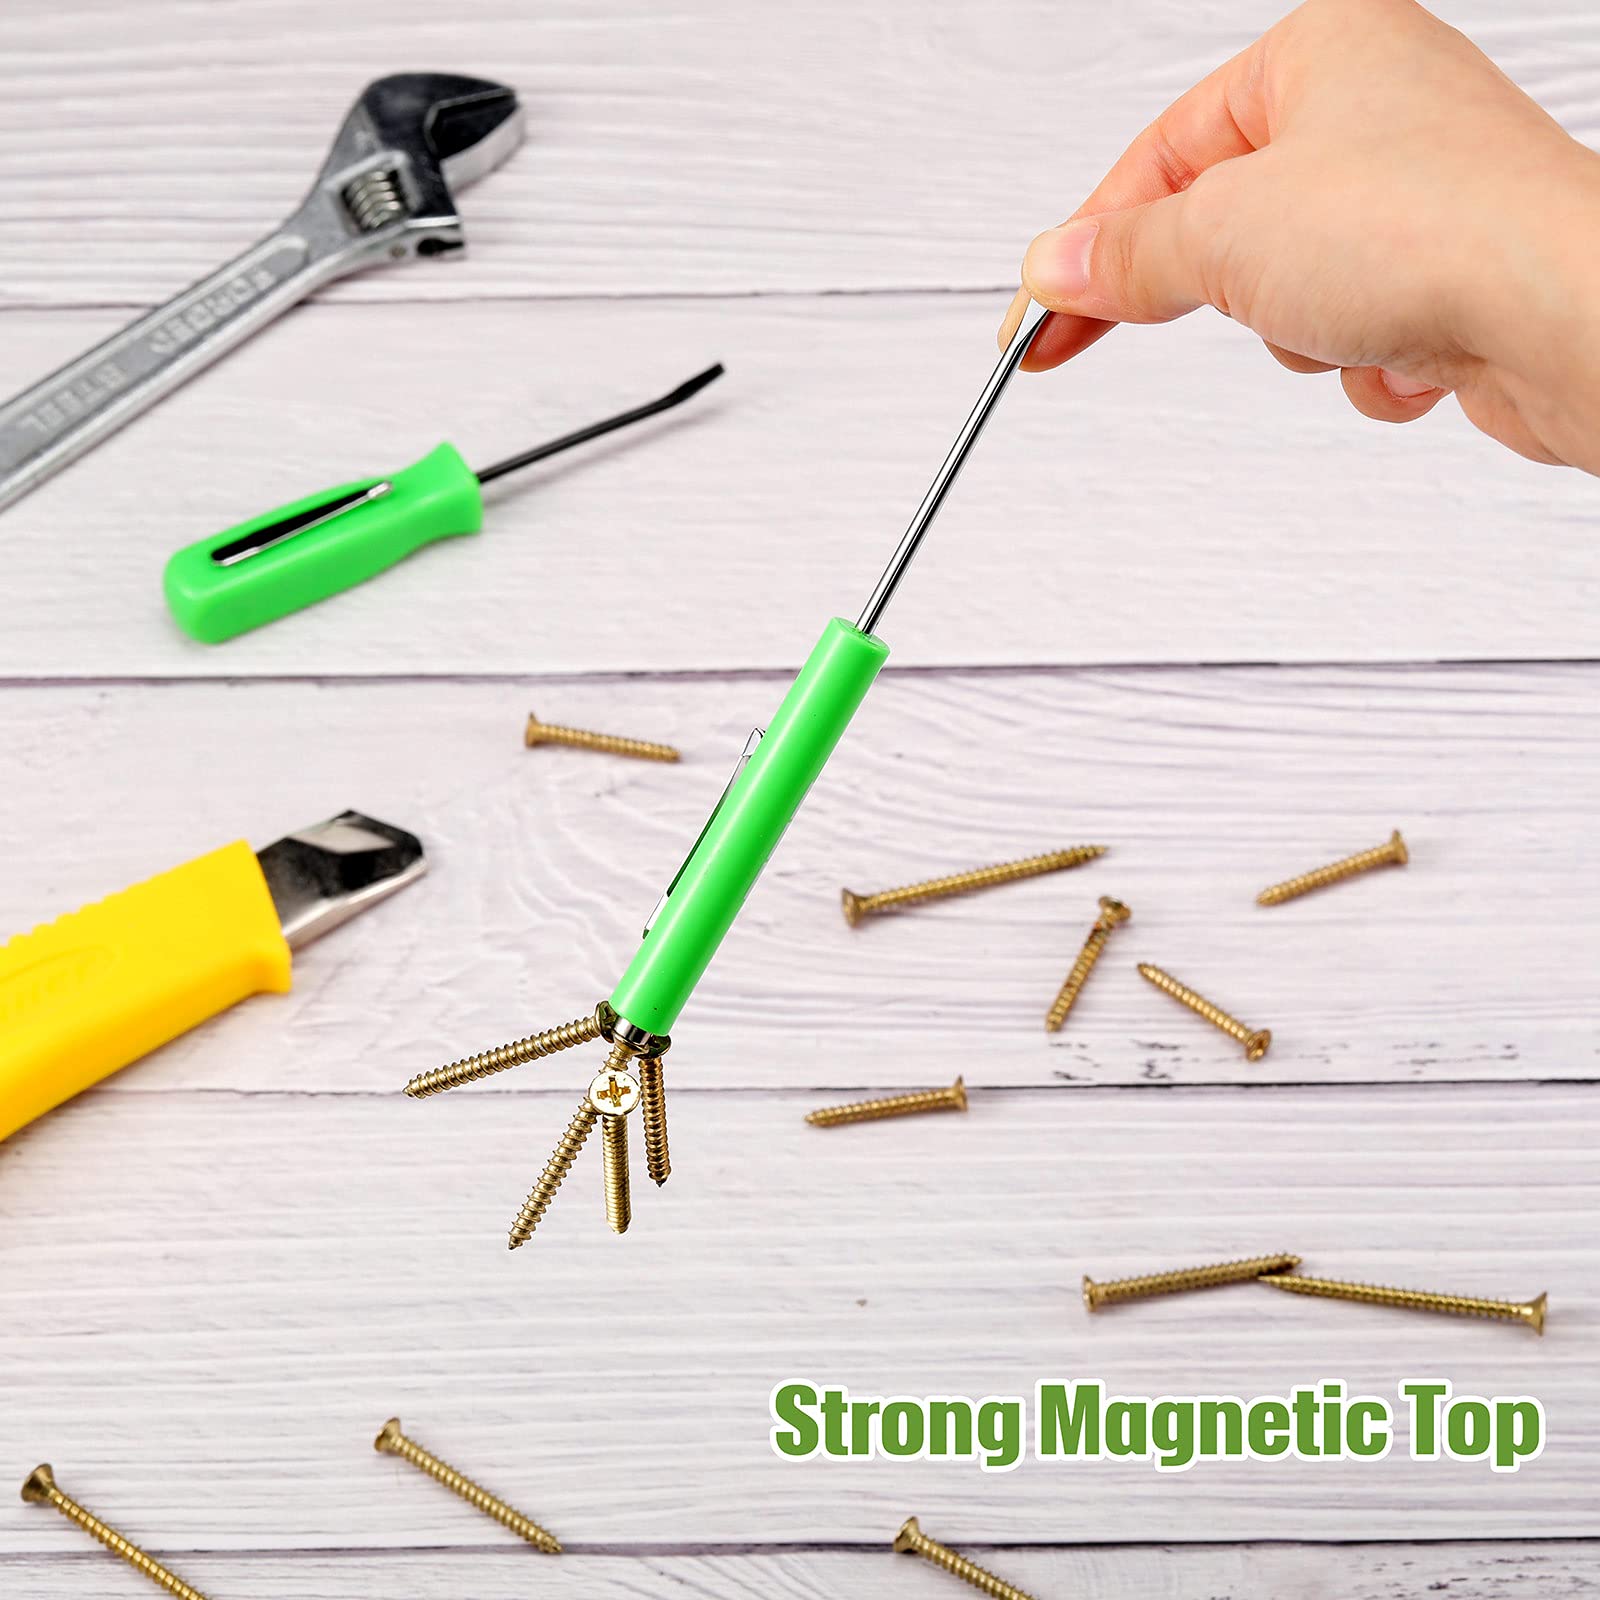 5 Pieces Magnetic Pocket Screwdriver Mini Pocket Screwdriver with Clip Small Slotted Head Screwdriver Tool Set for Home Office Gadgets Repair Tool Mechanics Electricians Technician (Green)